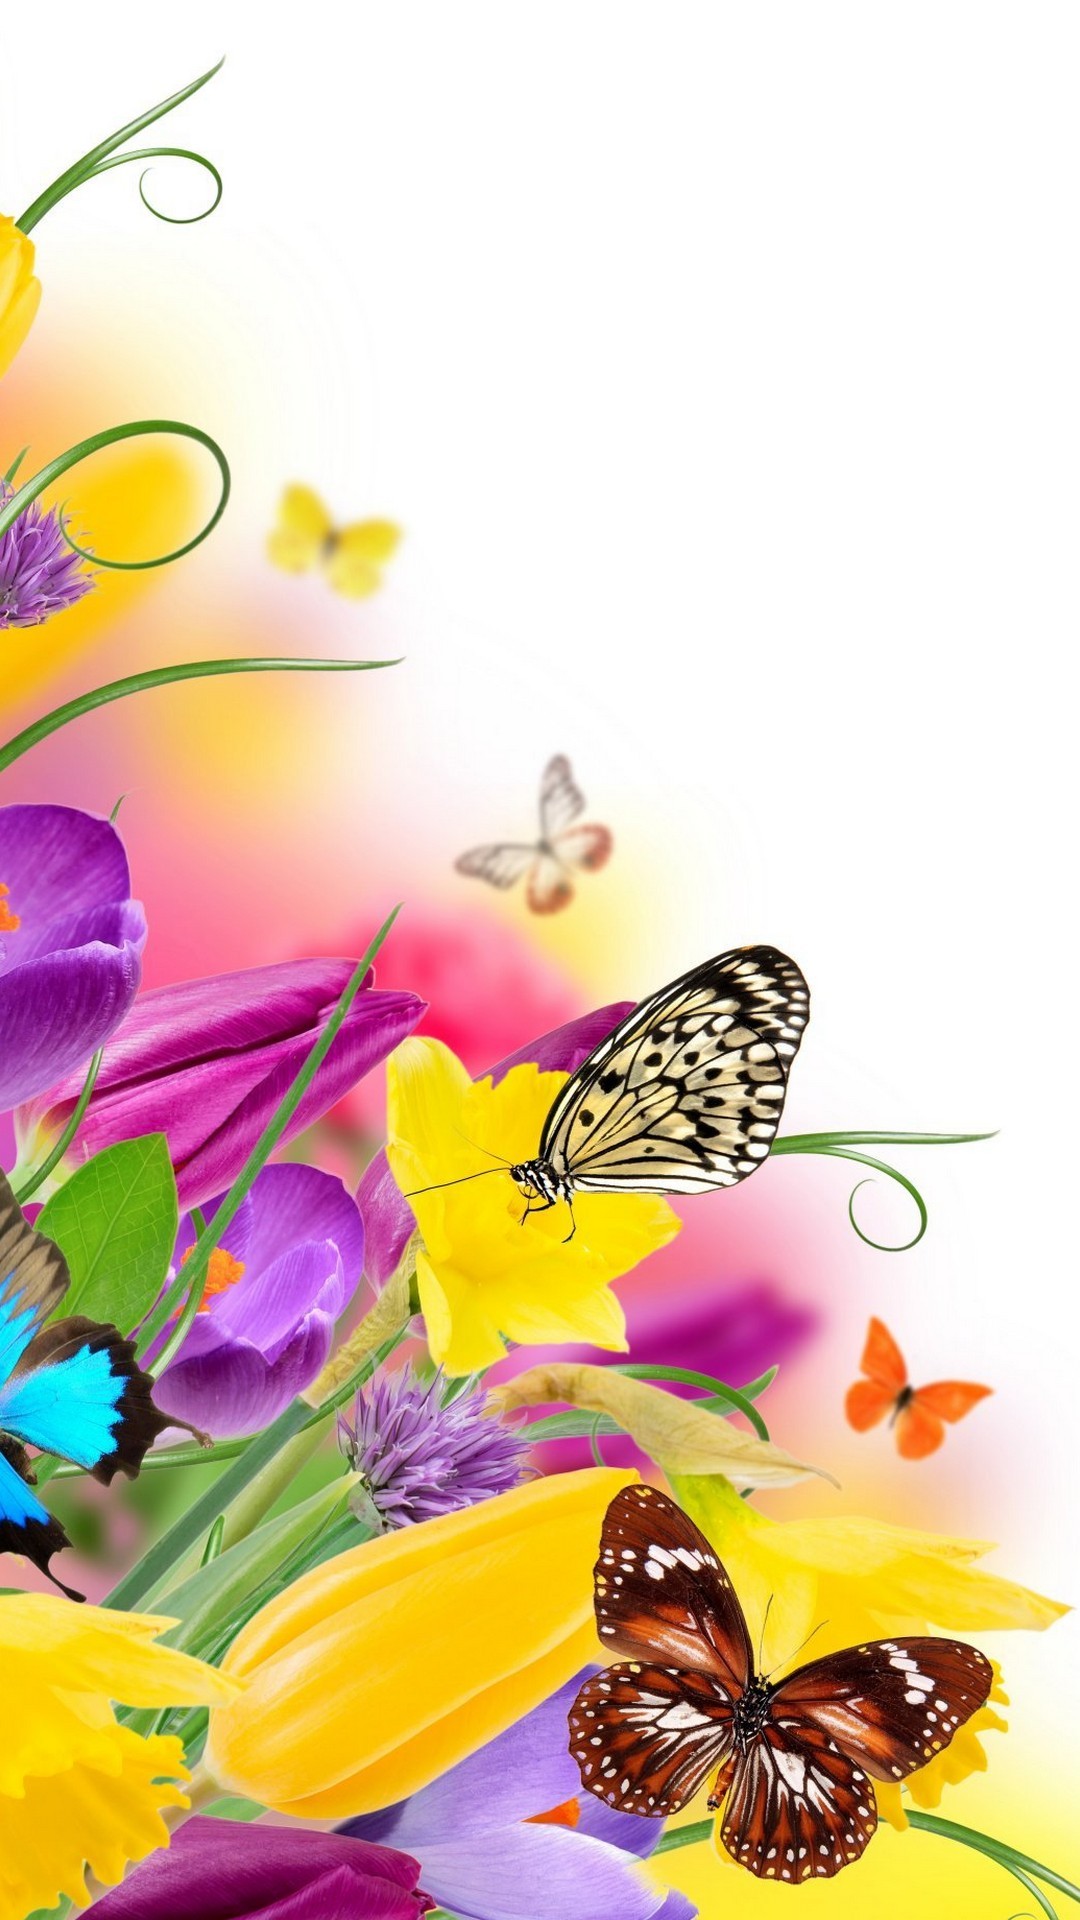 Wallpaper Cute Butterfly Android High Resolution 1080X1920